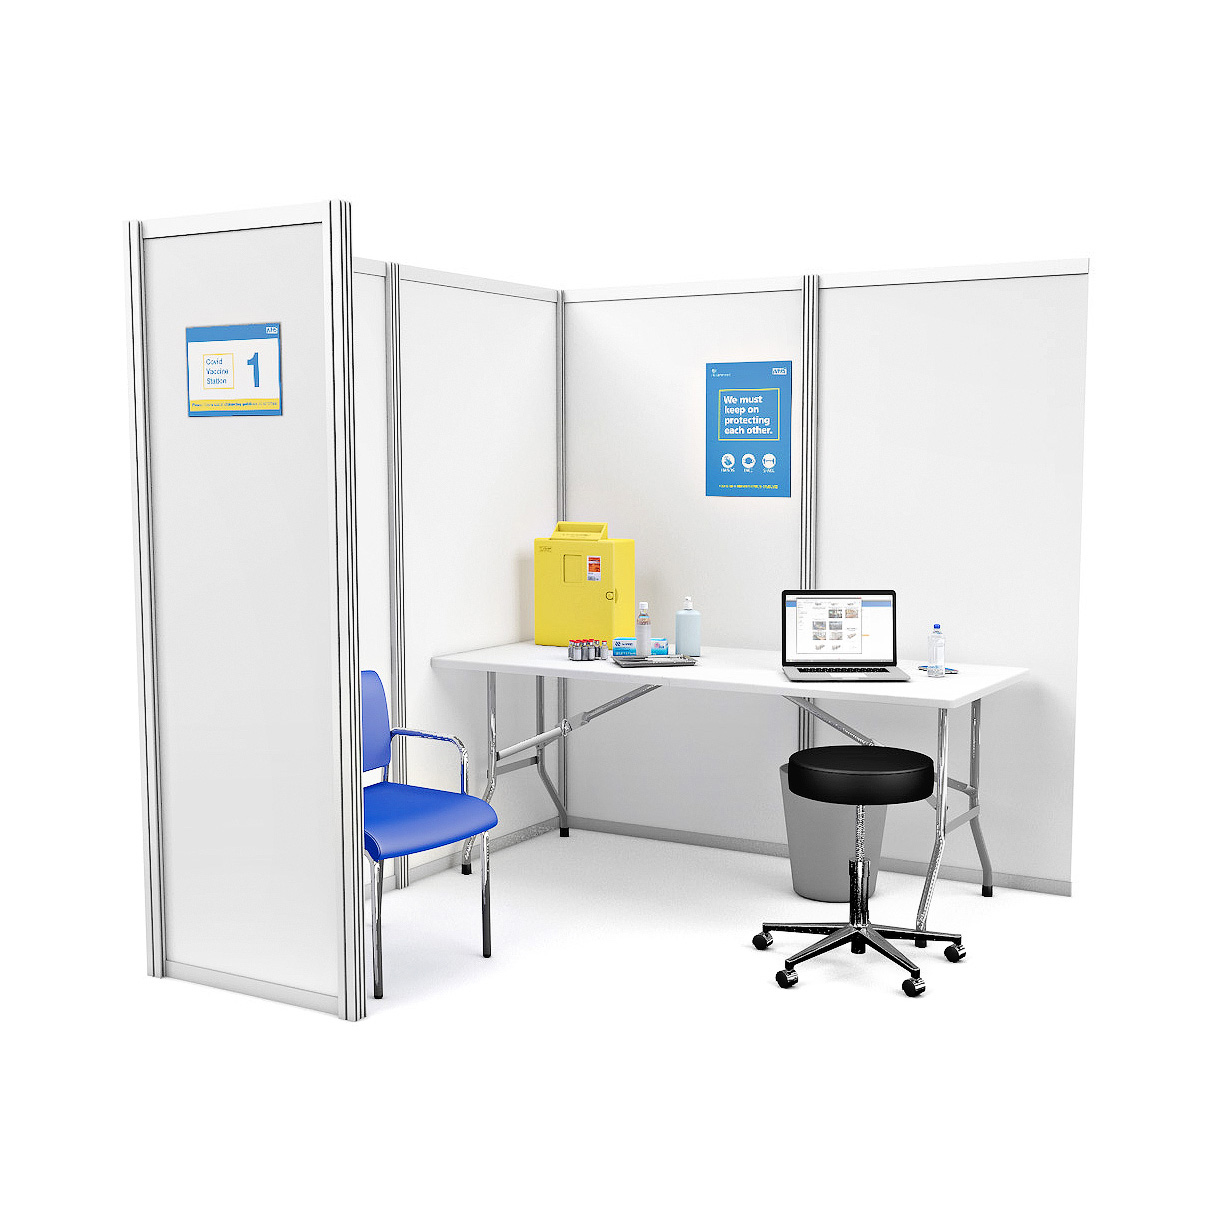 COVID-19 Vaccination Booth Cubicles For Safe Rollout of Coronavirus Vaccine